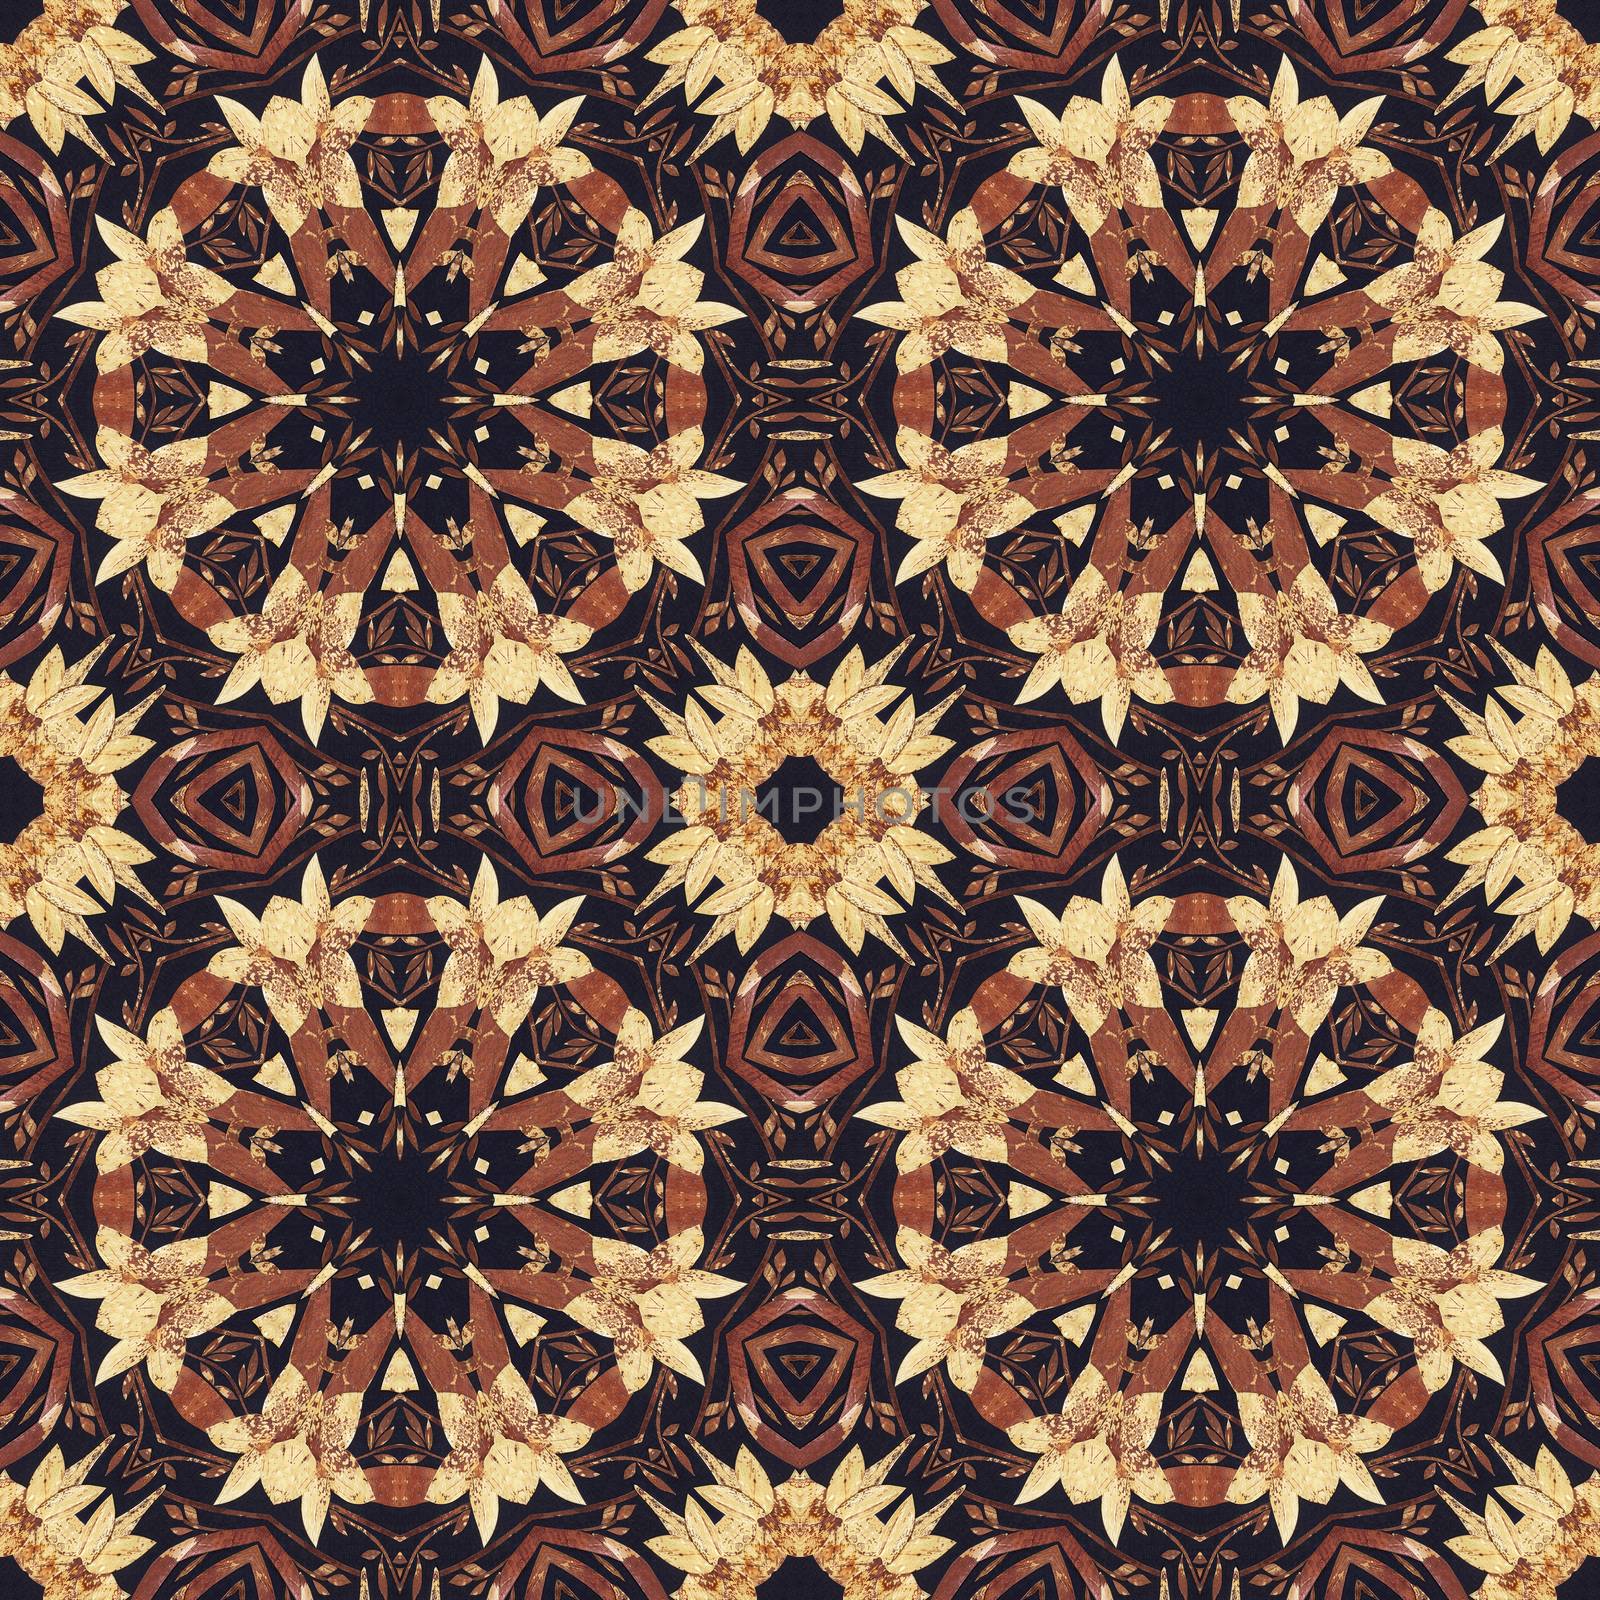 Abstract artistic pattern, seamless handmade floral ornament, applique from the back side of a birch bark on black fabric background